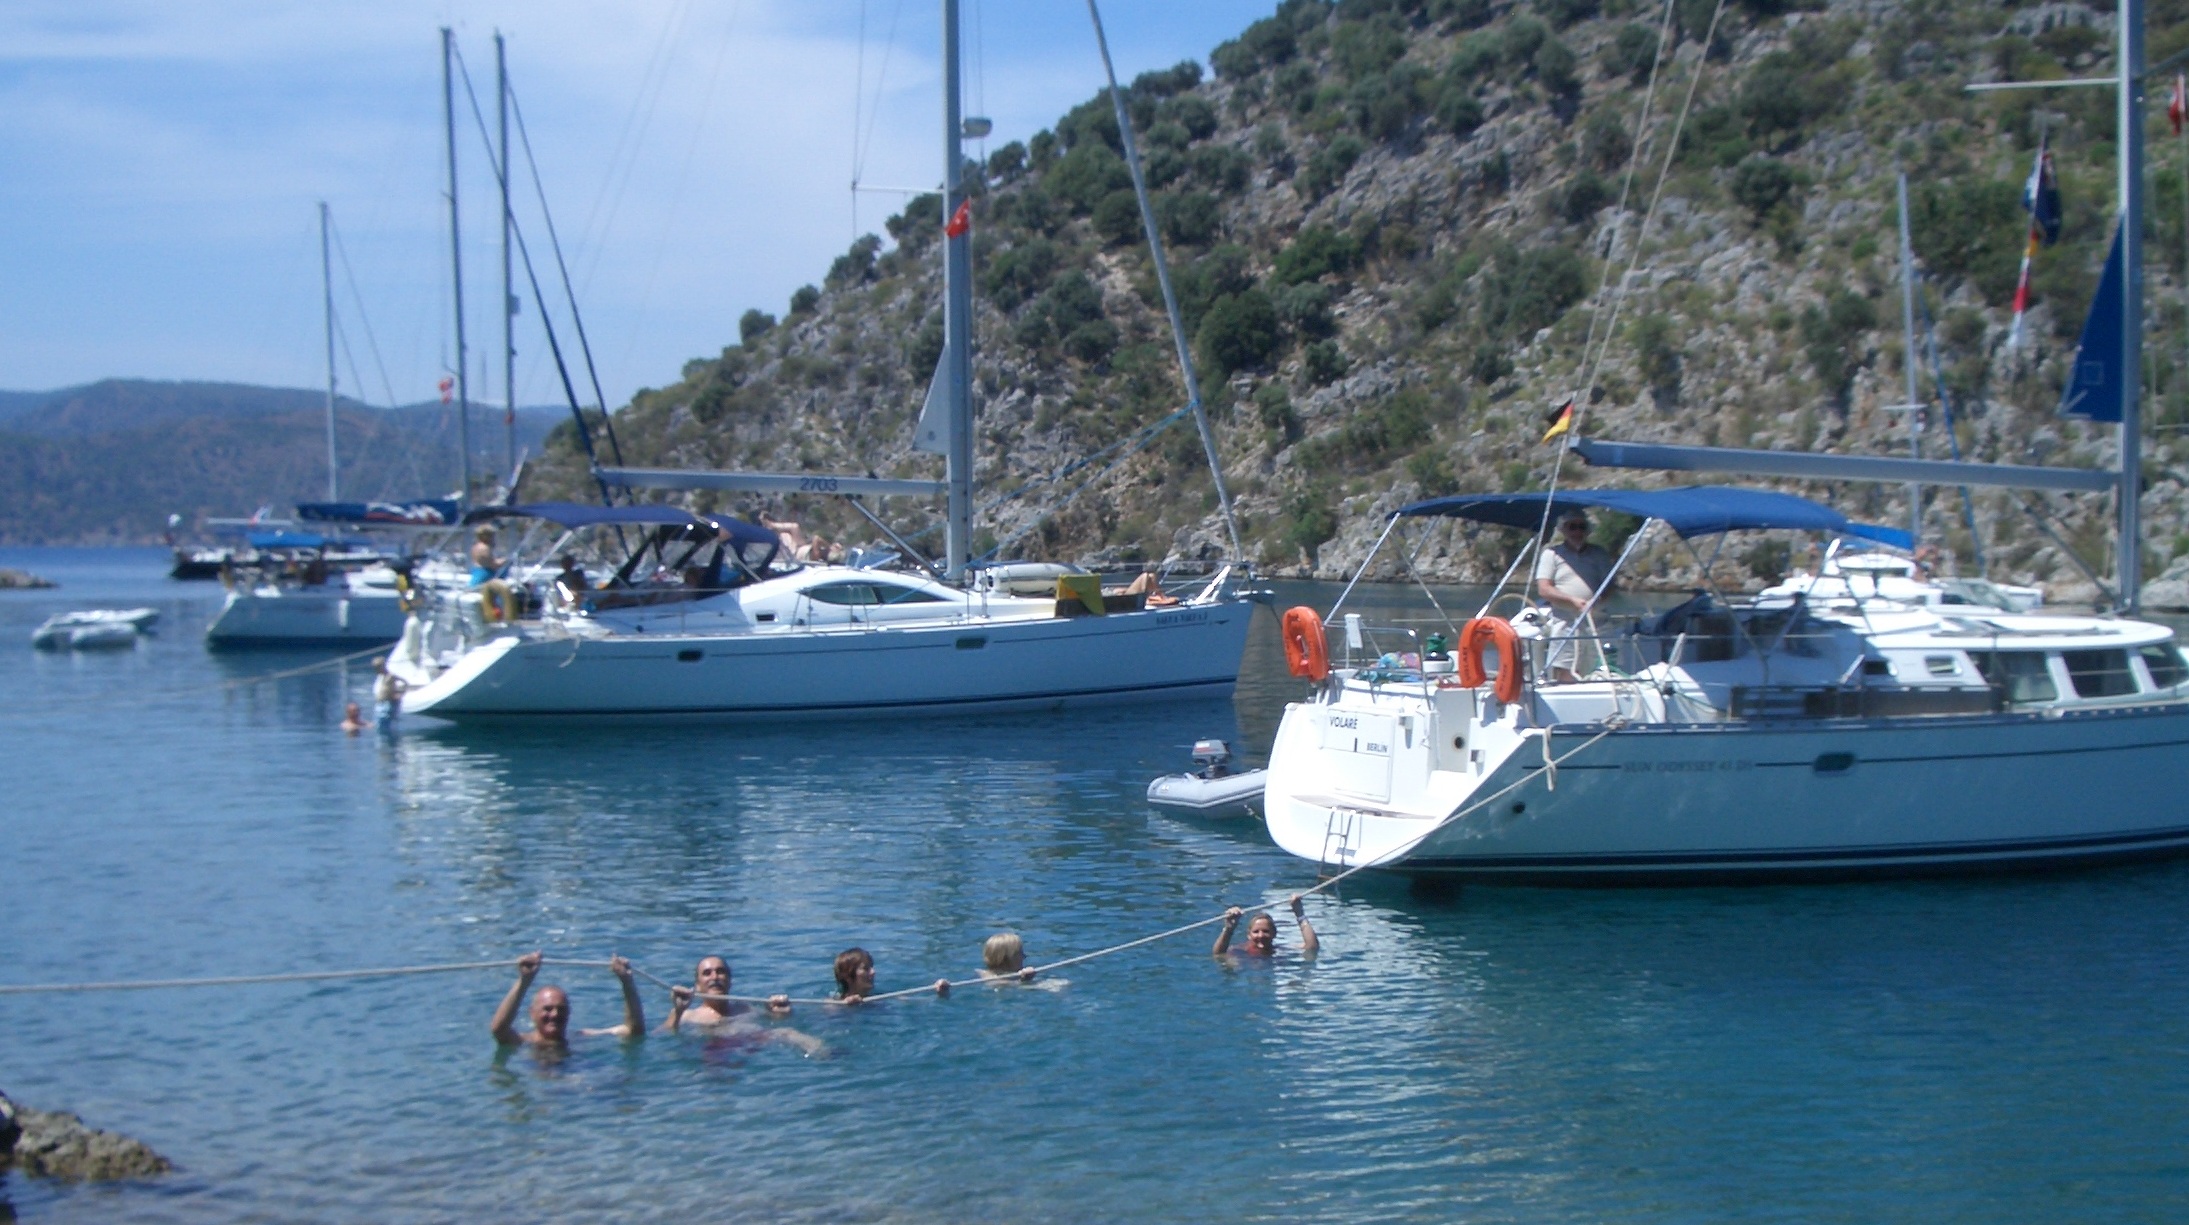 Book your own private charter through Allsail